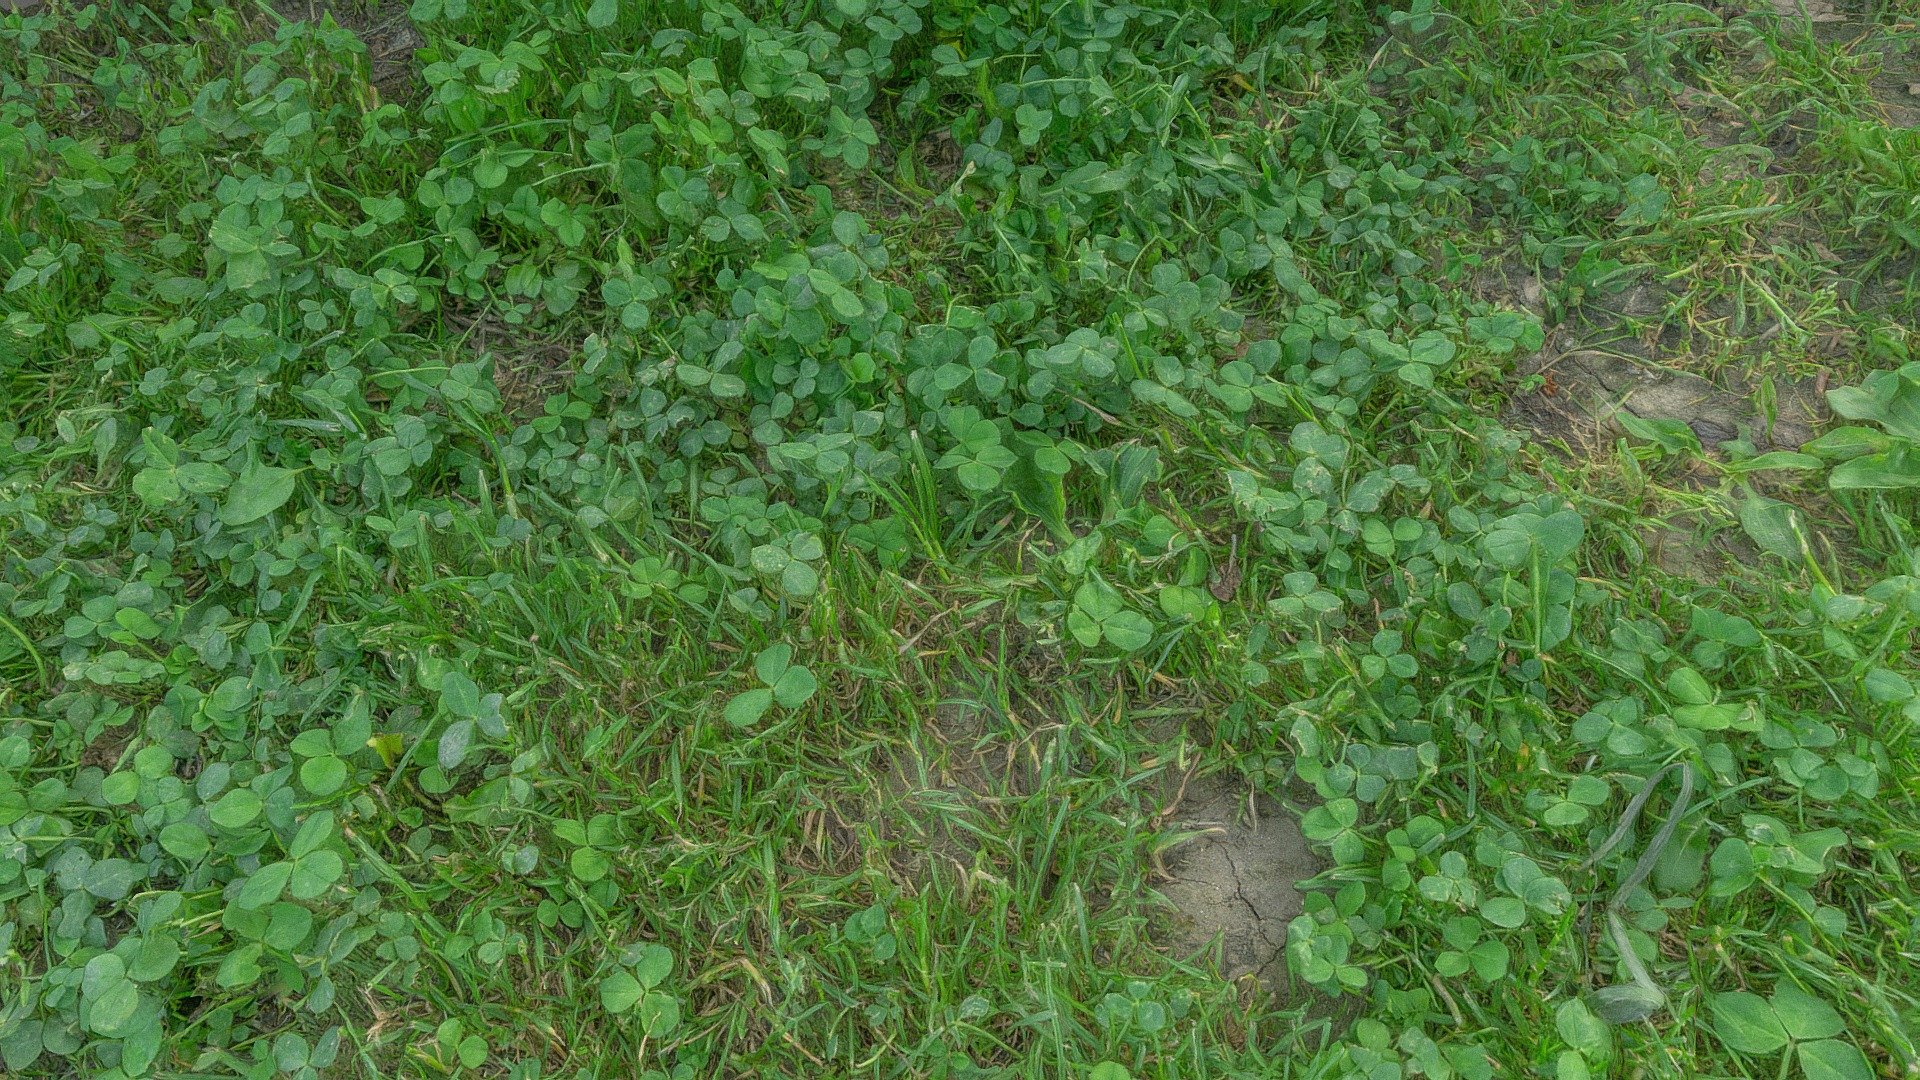 Patch of grass with clover shamrock leaved flower plant

photogrammetry scan (120x24mp), 3x16k textures - raw scan


AgisoftNatureChallenge - Patch of shamrock grass - Buy Royalty Free 3D model by matousekfoto 3d model